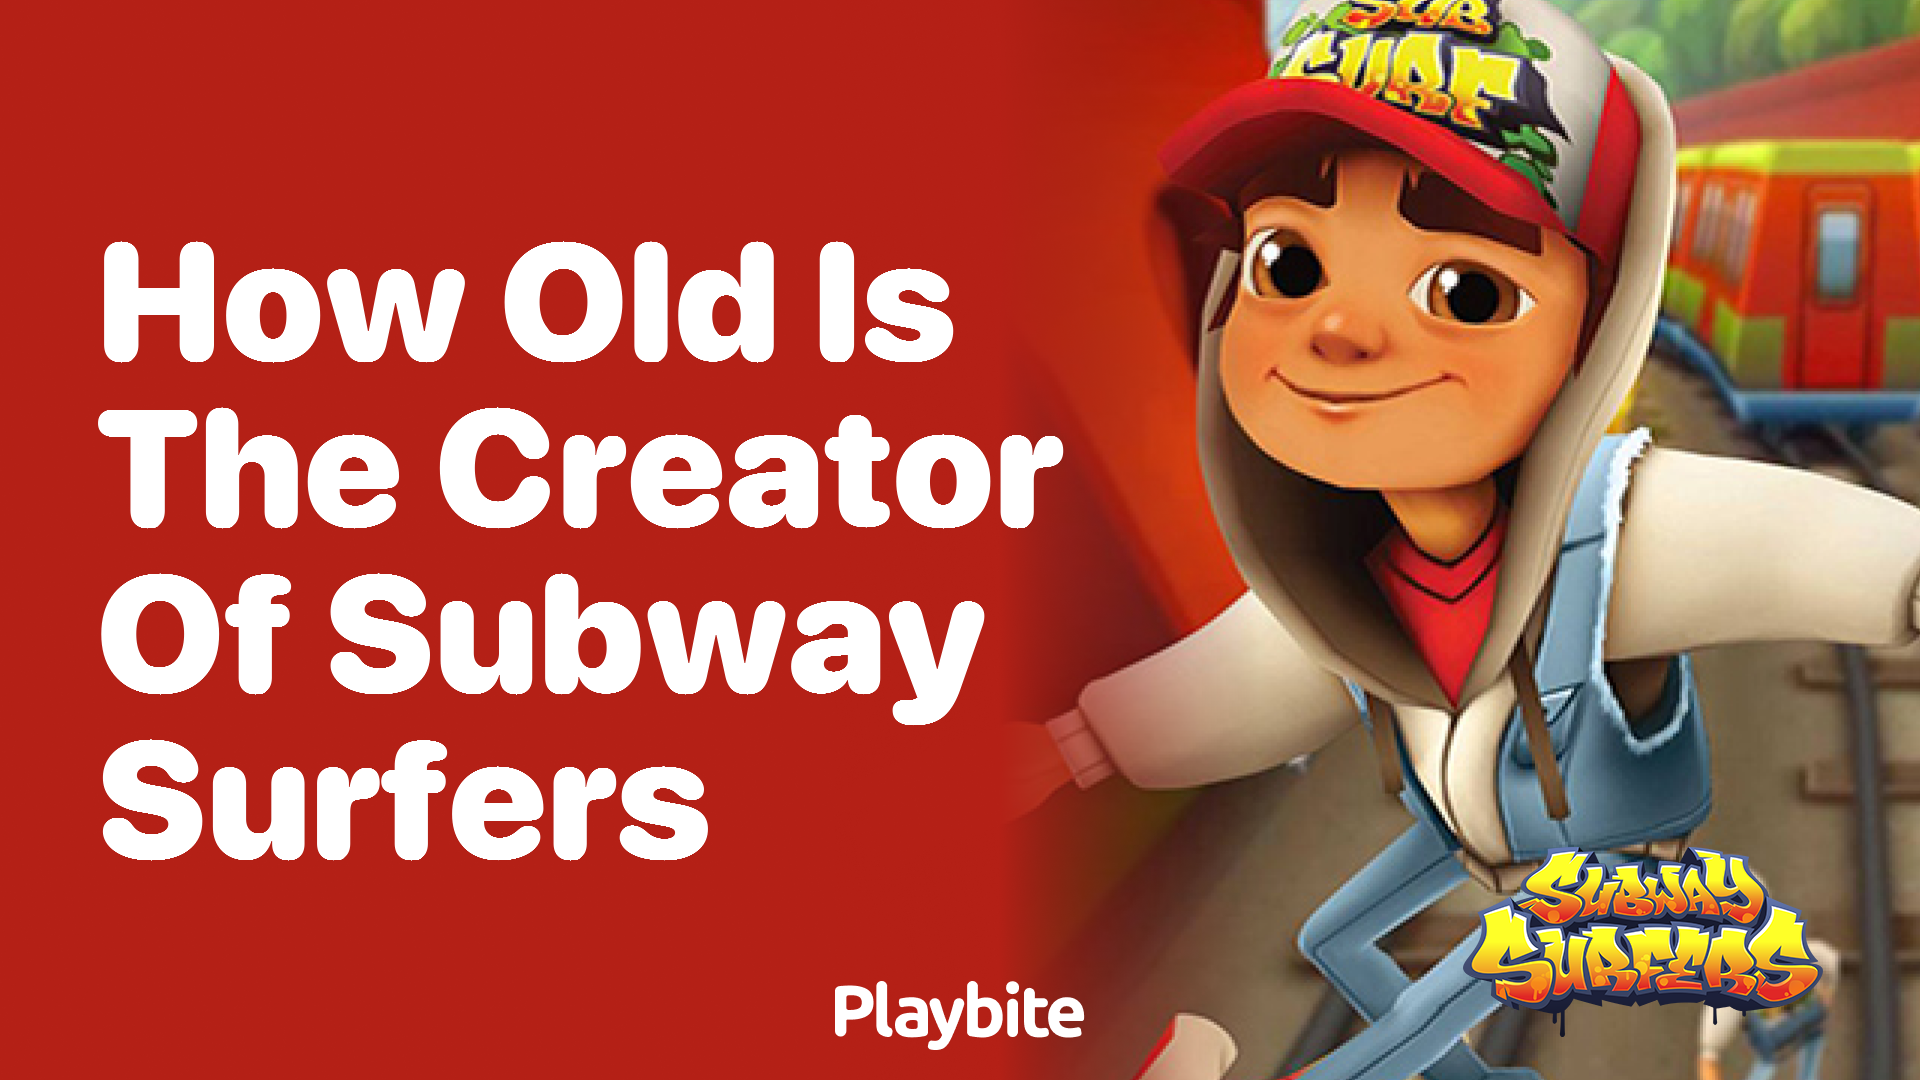 How old is the creator of Subway Surfers?